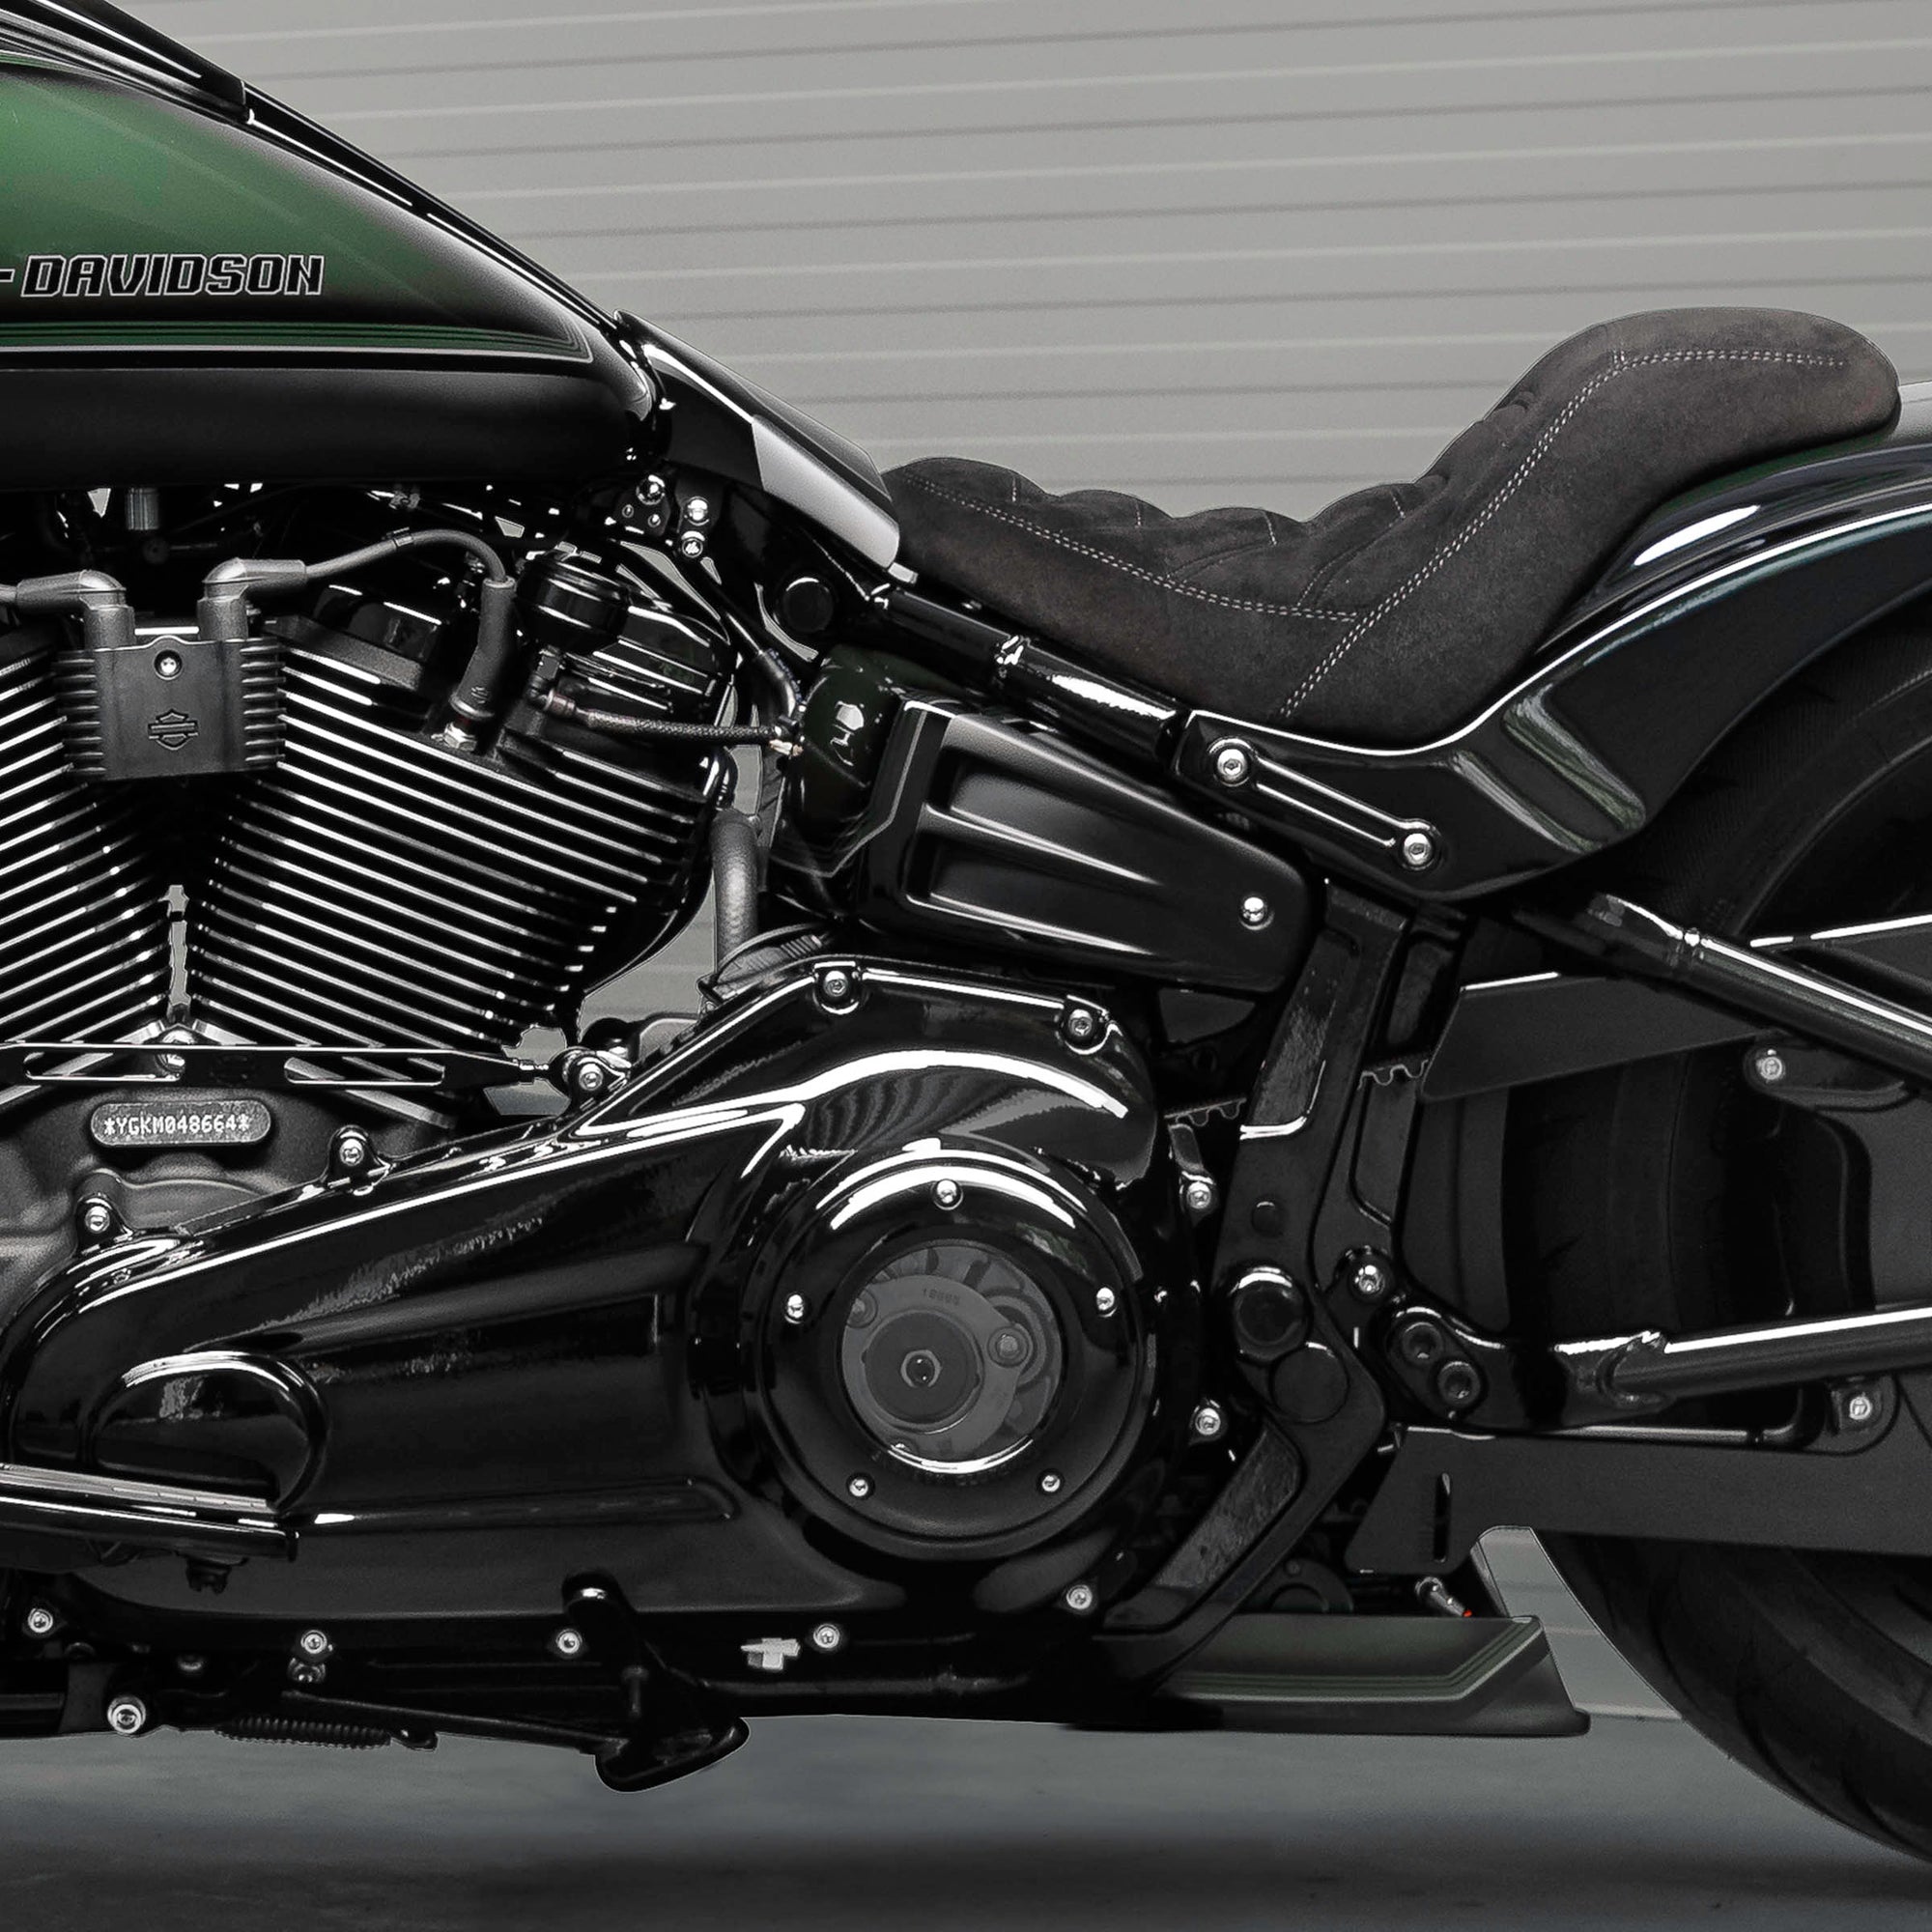 Zoomed Harley Davidson motorcycle with Killer Custom parts from the side neutral background